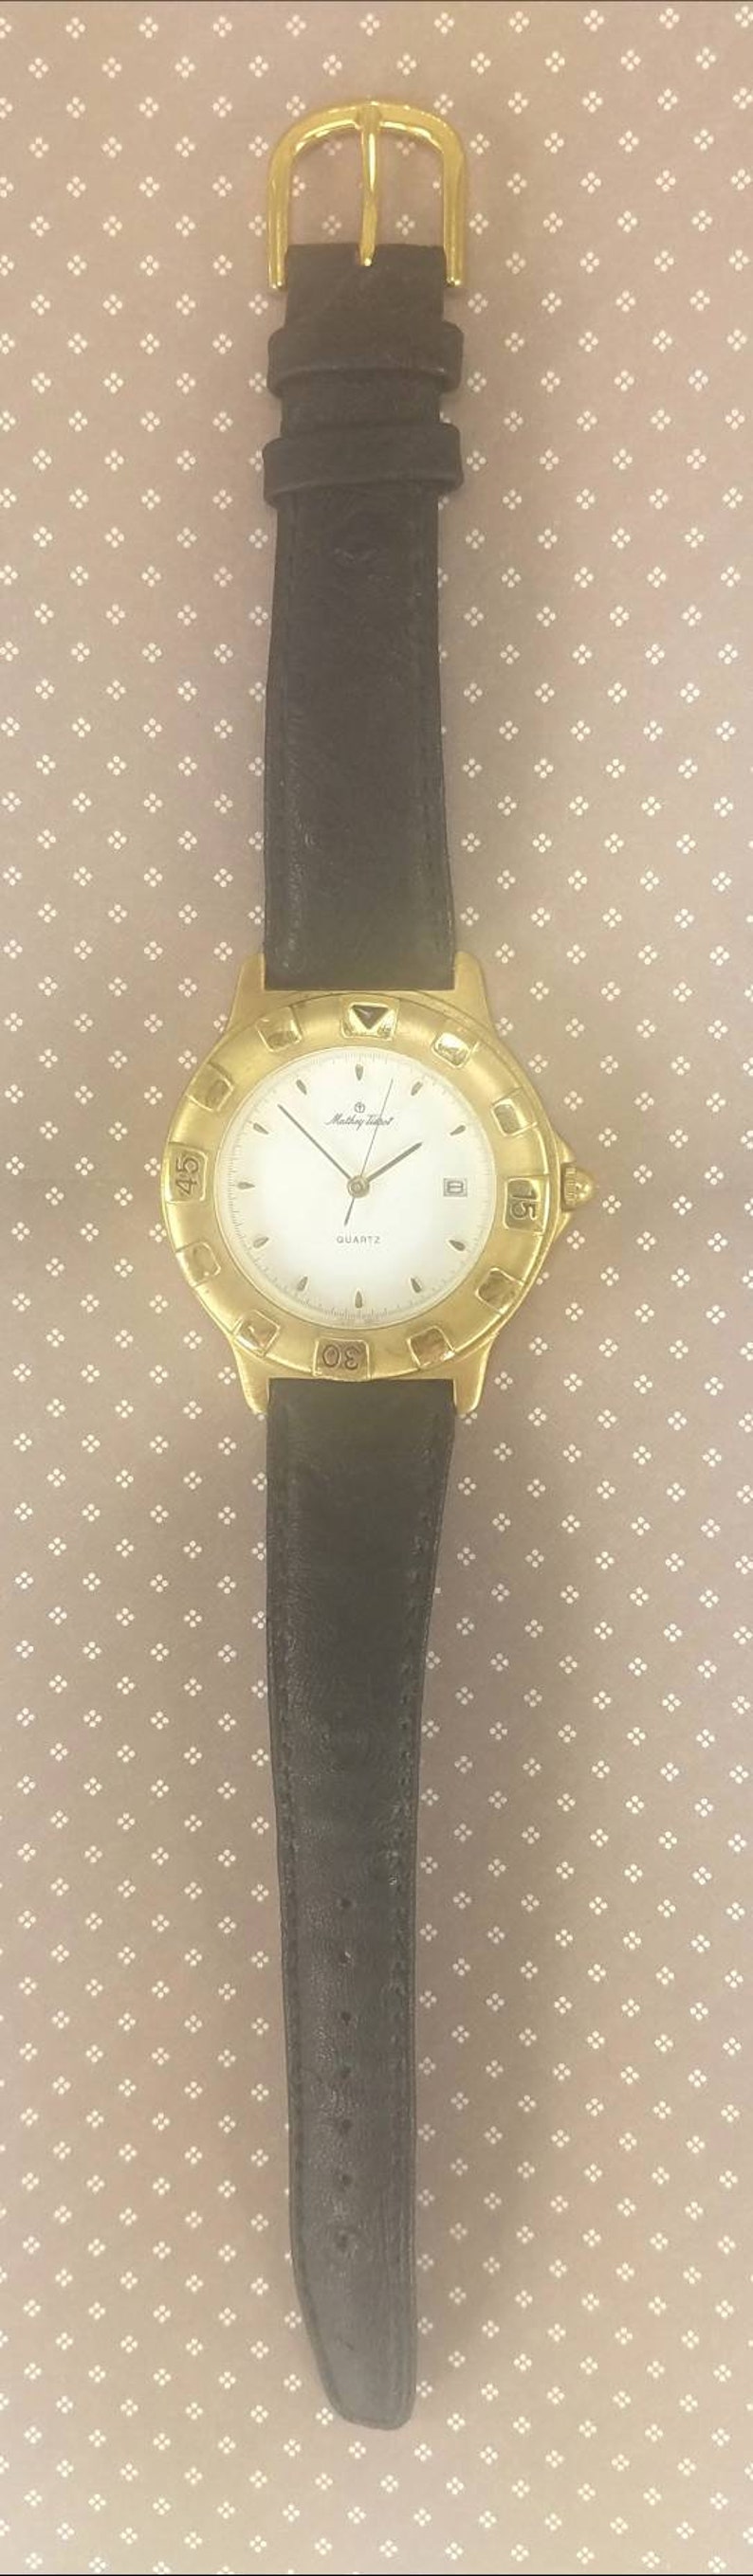 Mathey Tissot Men's Watch Stainless Steel Gold Plated Vintage NEW 1990's image 3